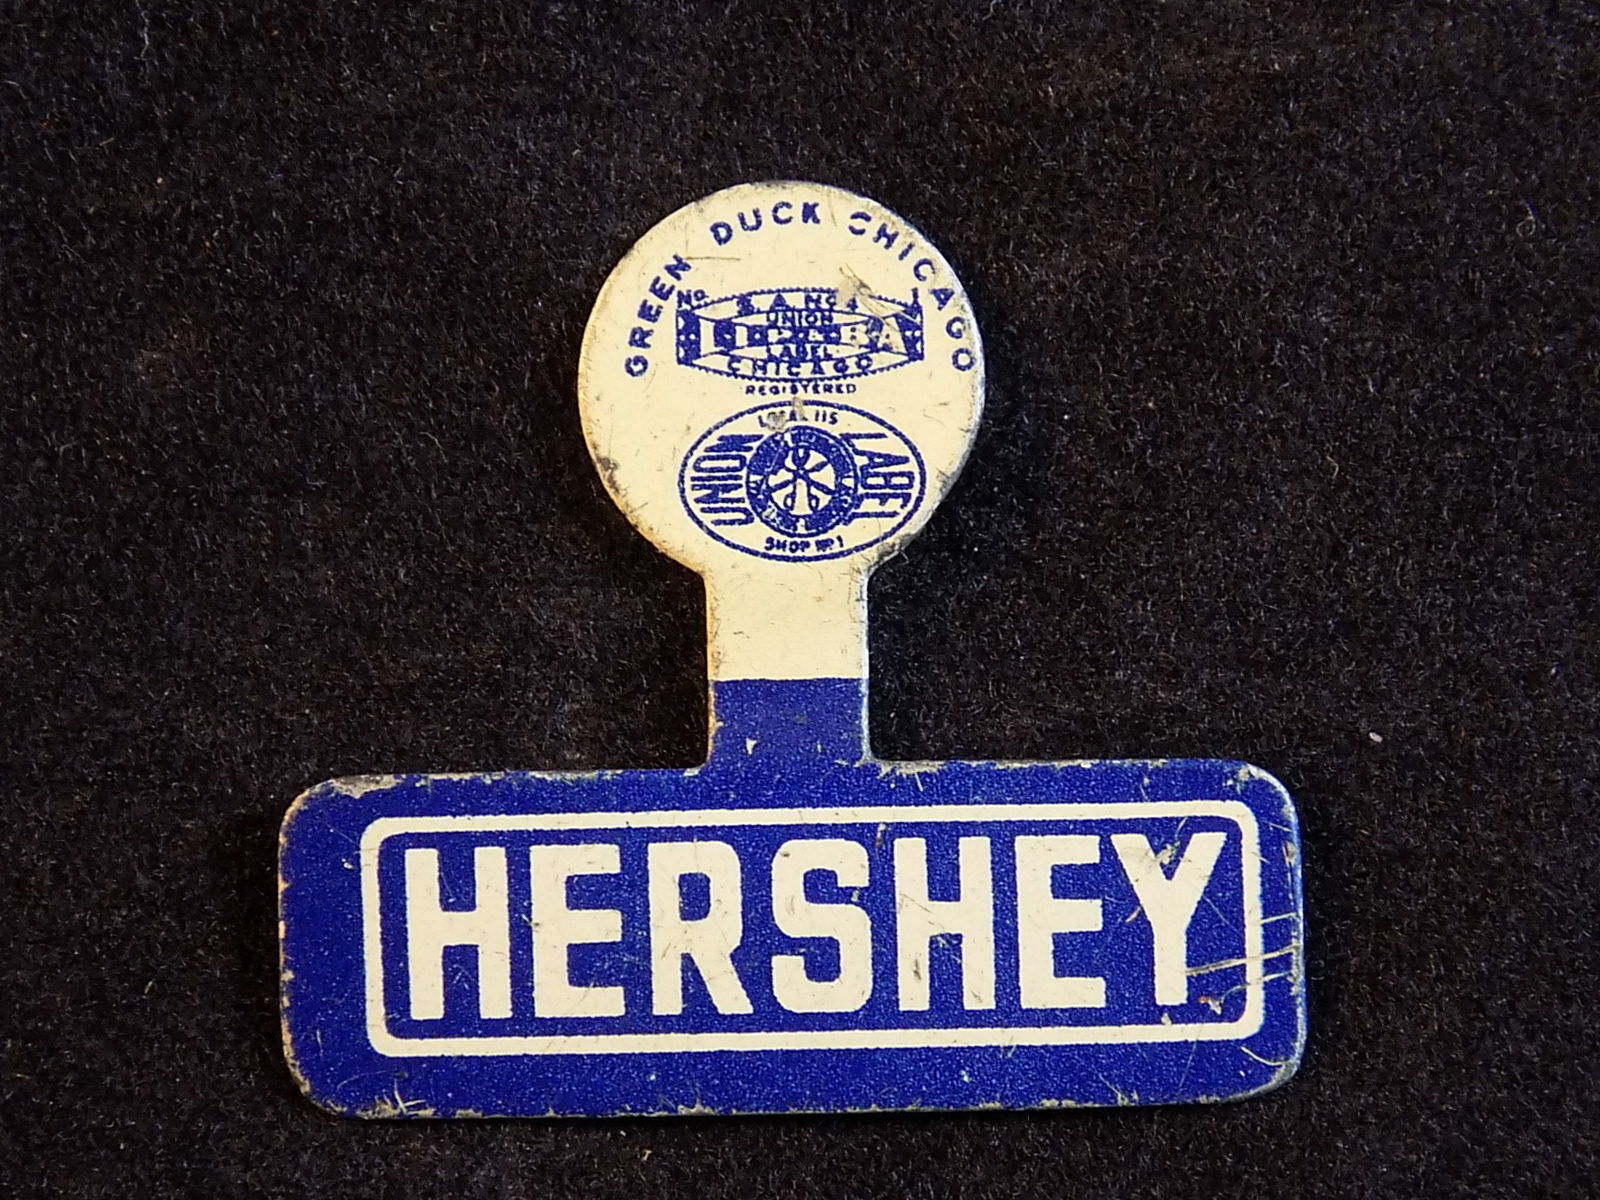 Primary image for Vintage GREEN DUCK TAB BACK HERSHEY Promotional Advertising BUTTON 